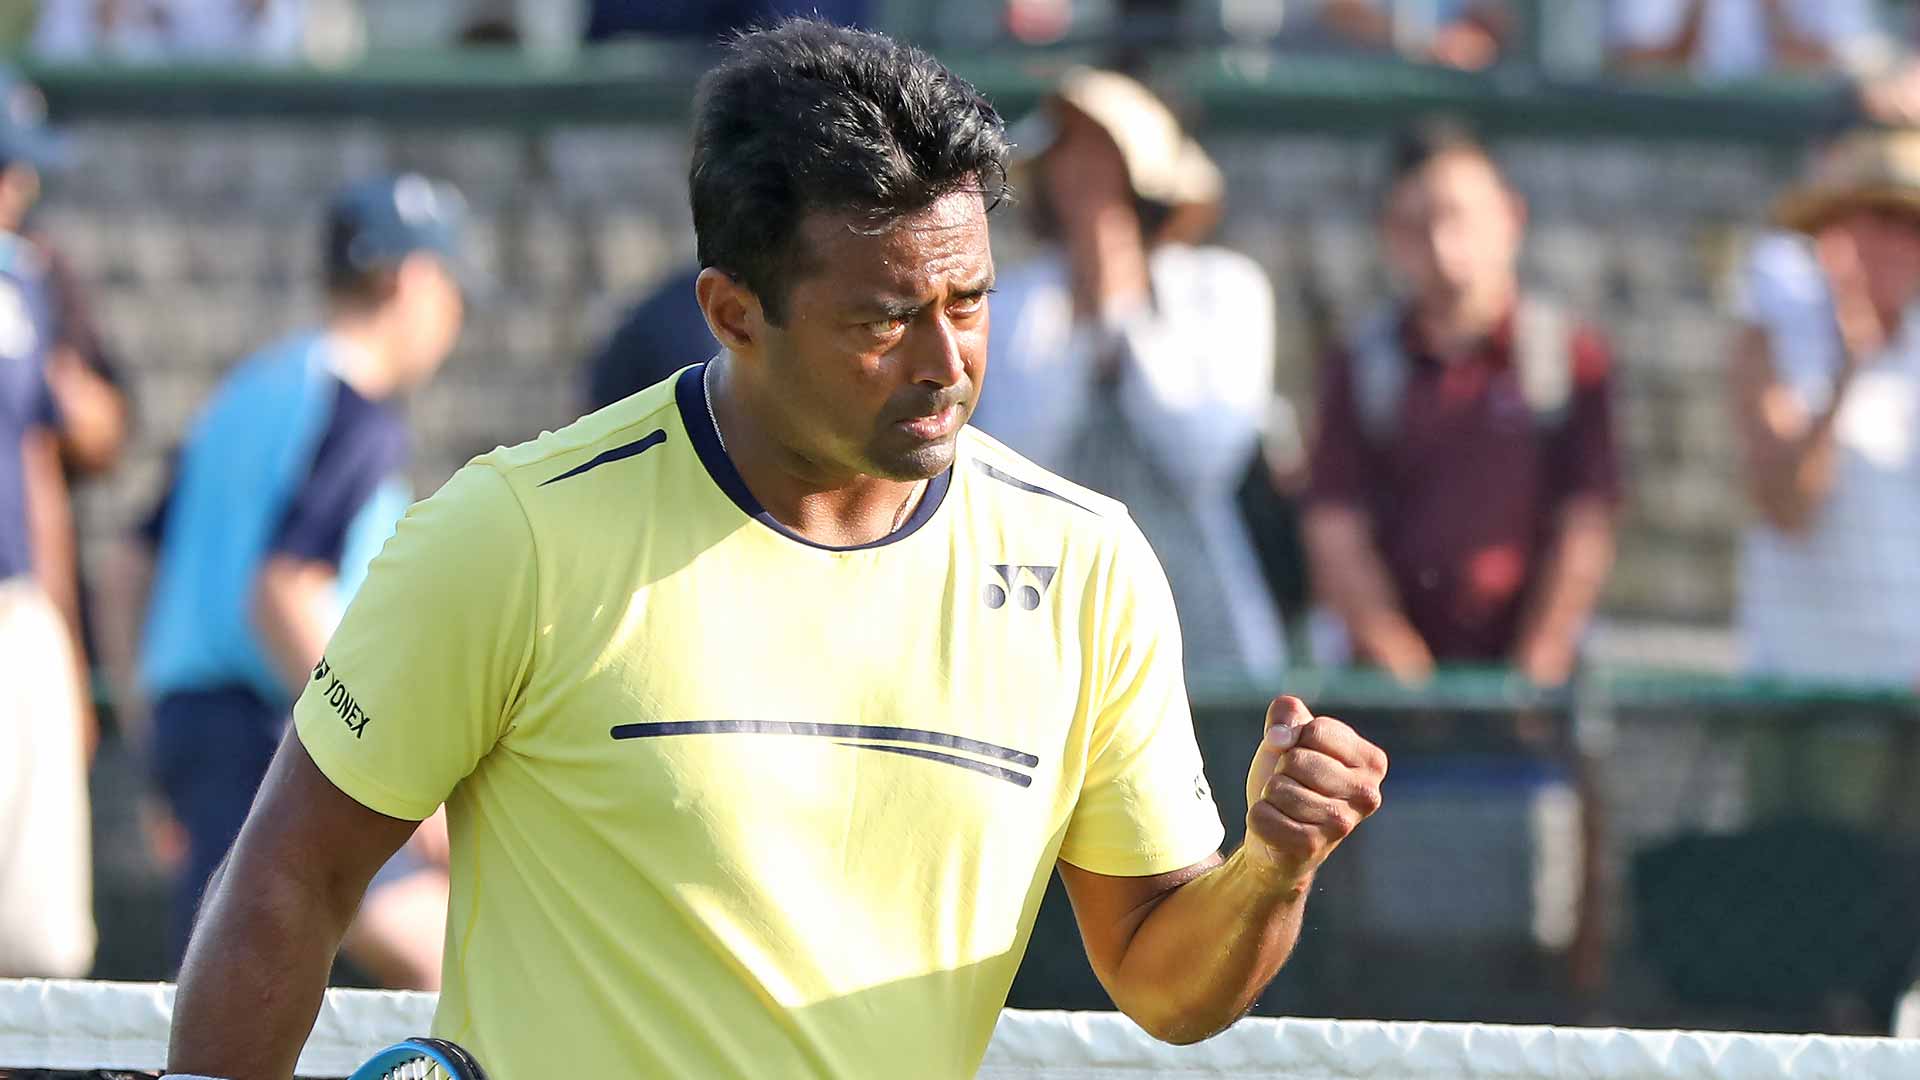 Former doubles World No. 1 Leander Paes won 18 Grand Slam titles across men's doubles and mixed doubles.